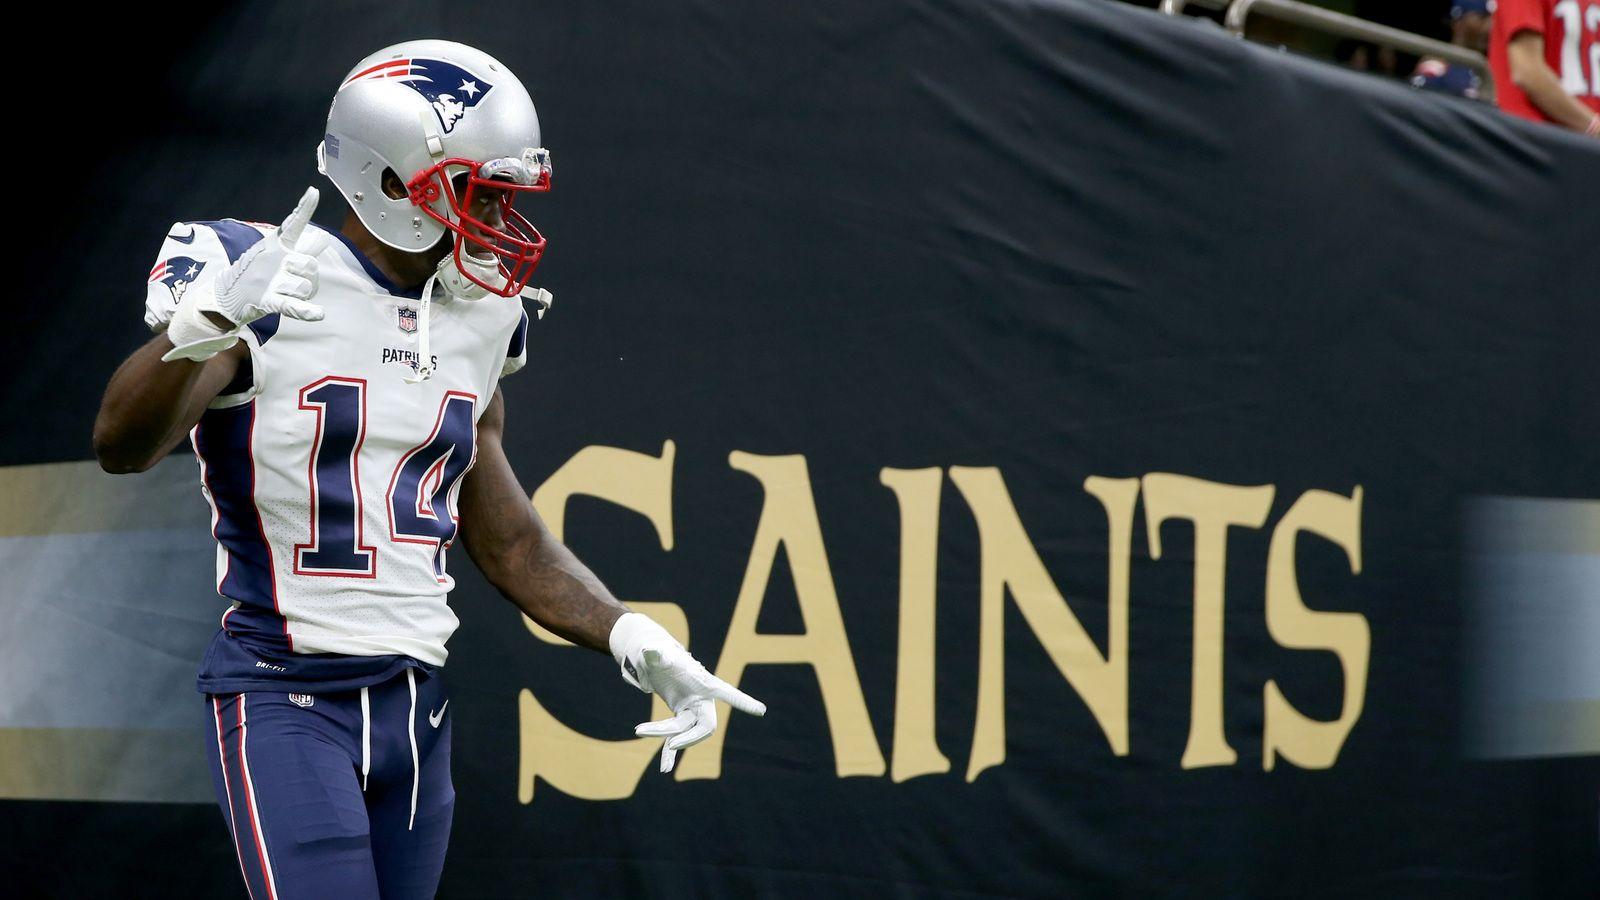 Report: Brandin Cooks doubting Drew Brees led to trade